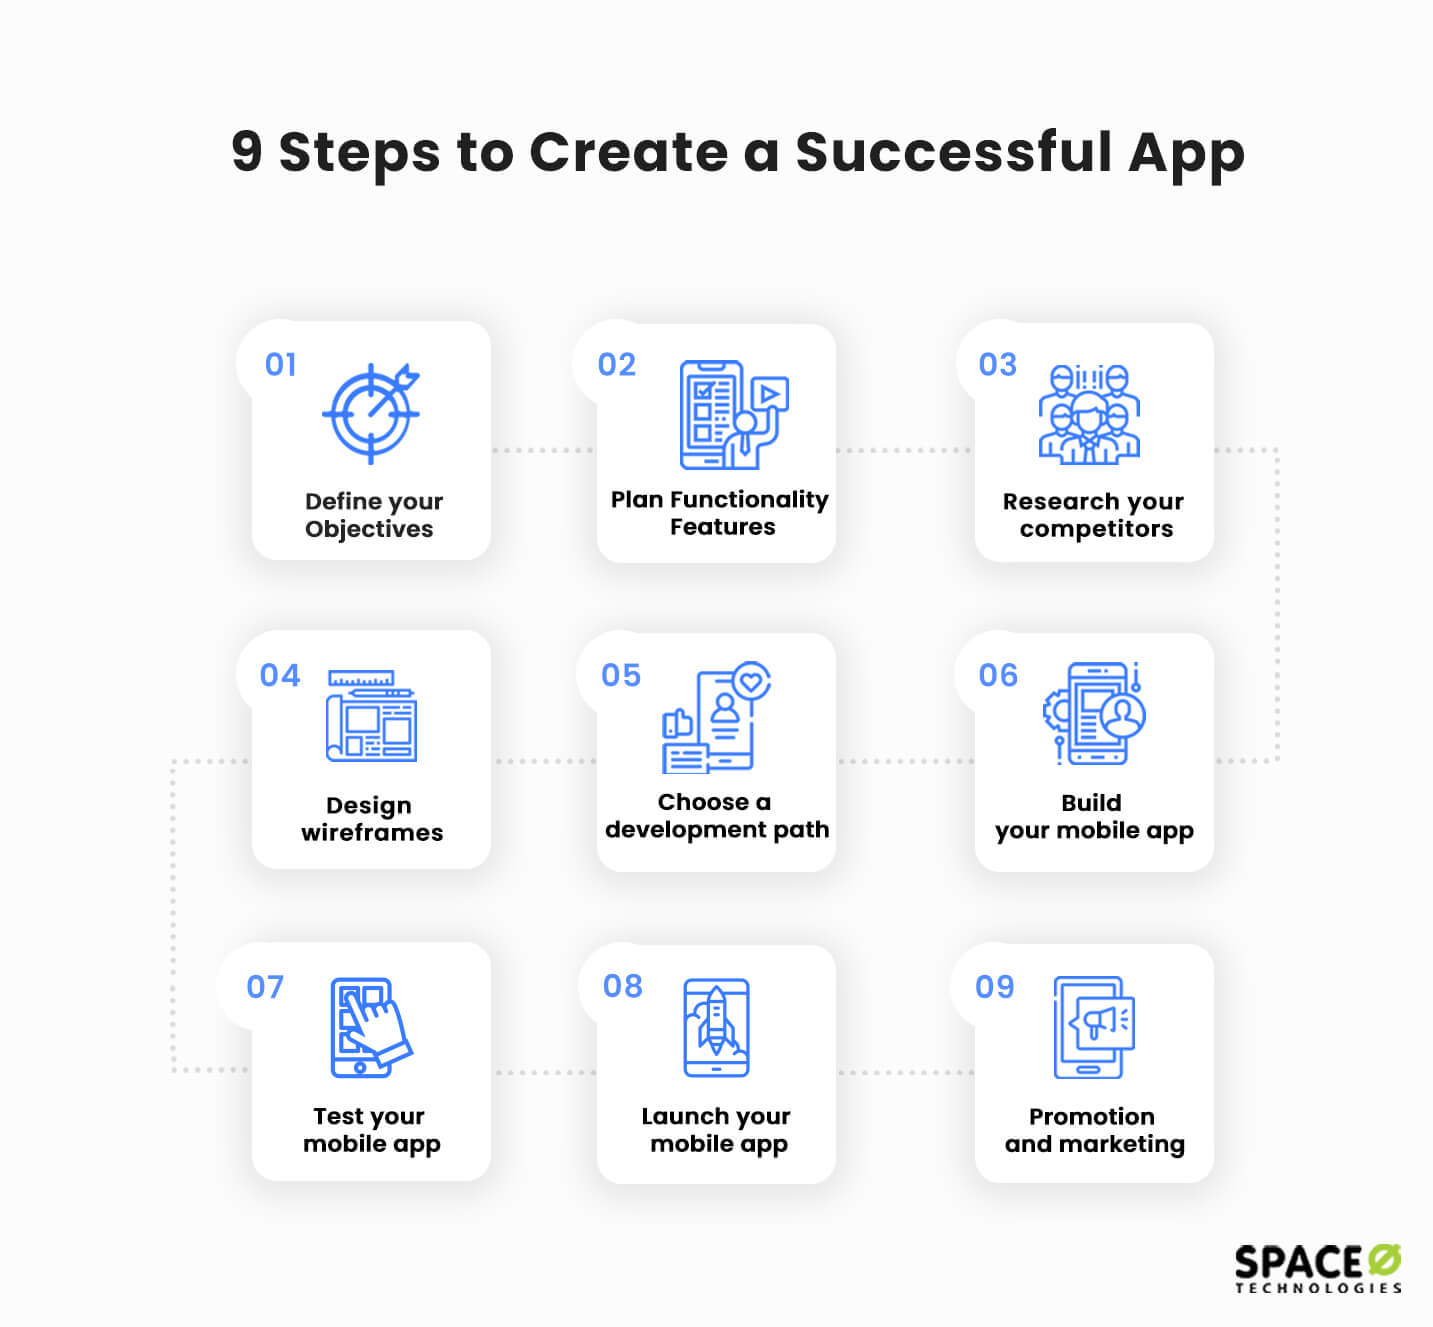 How to Create an App in 28 Steps? [A Step by Step Guide]